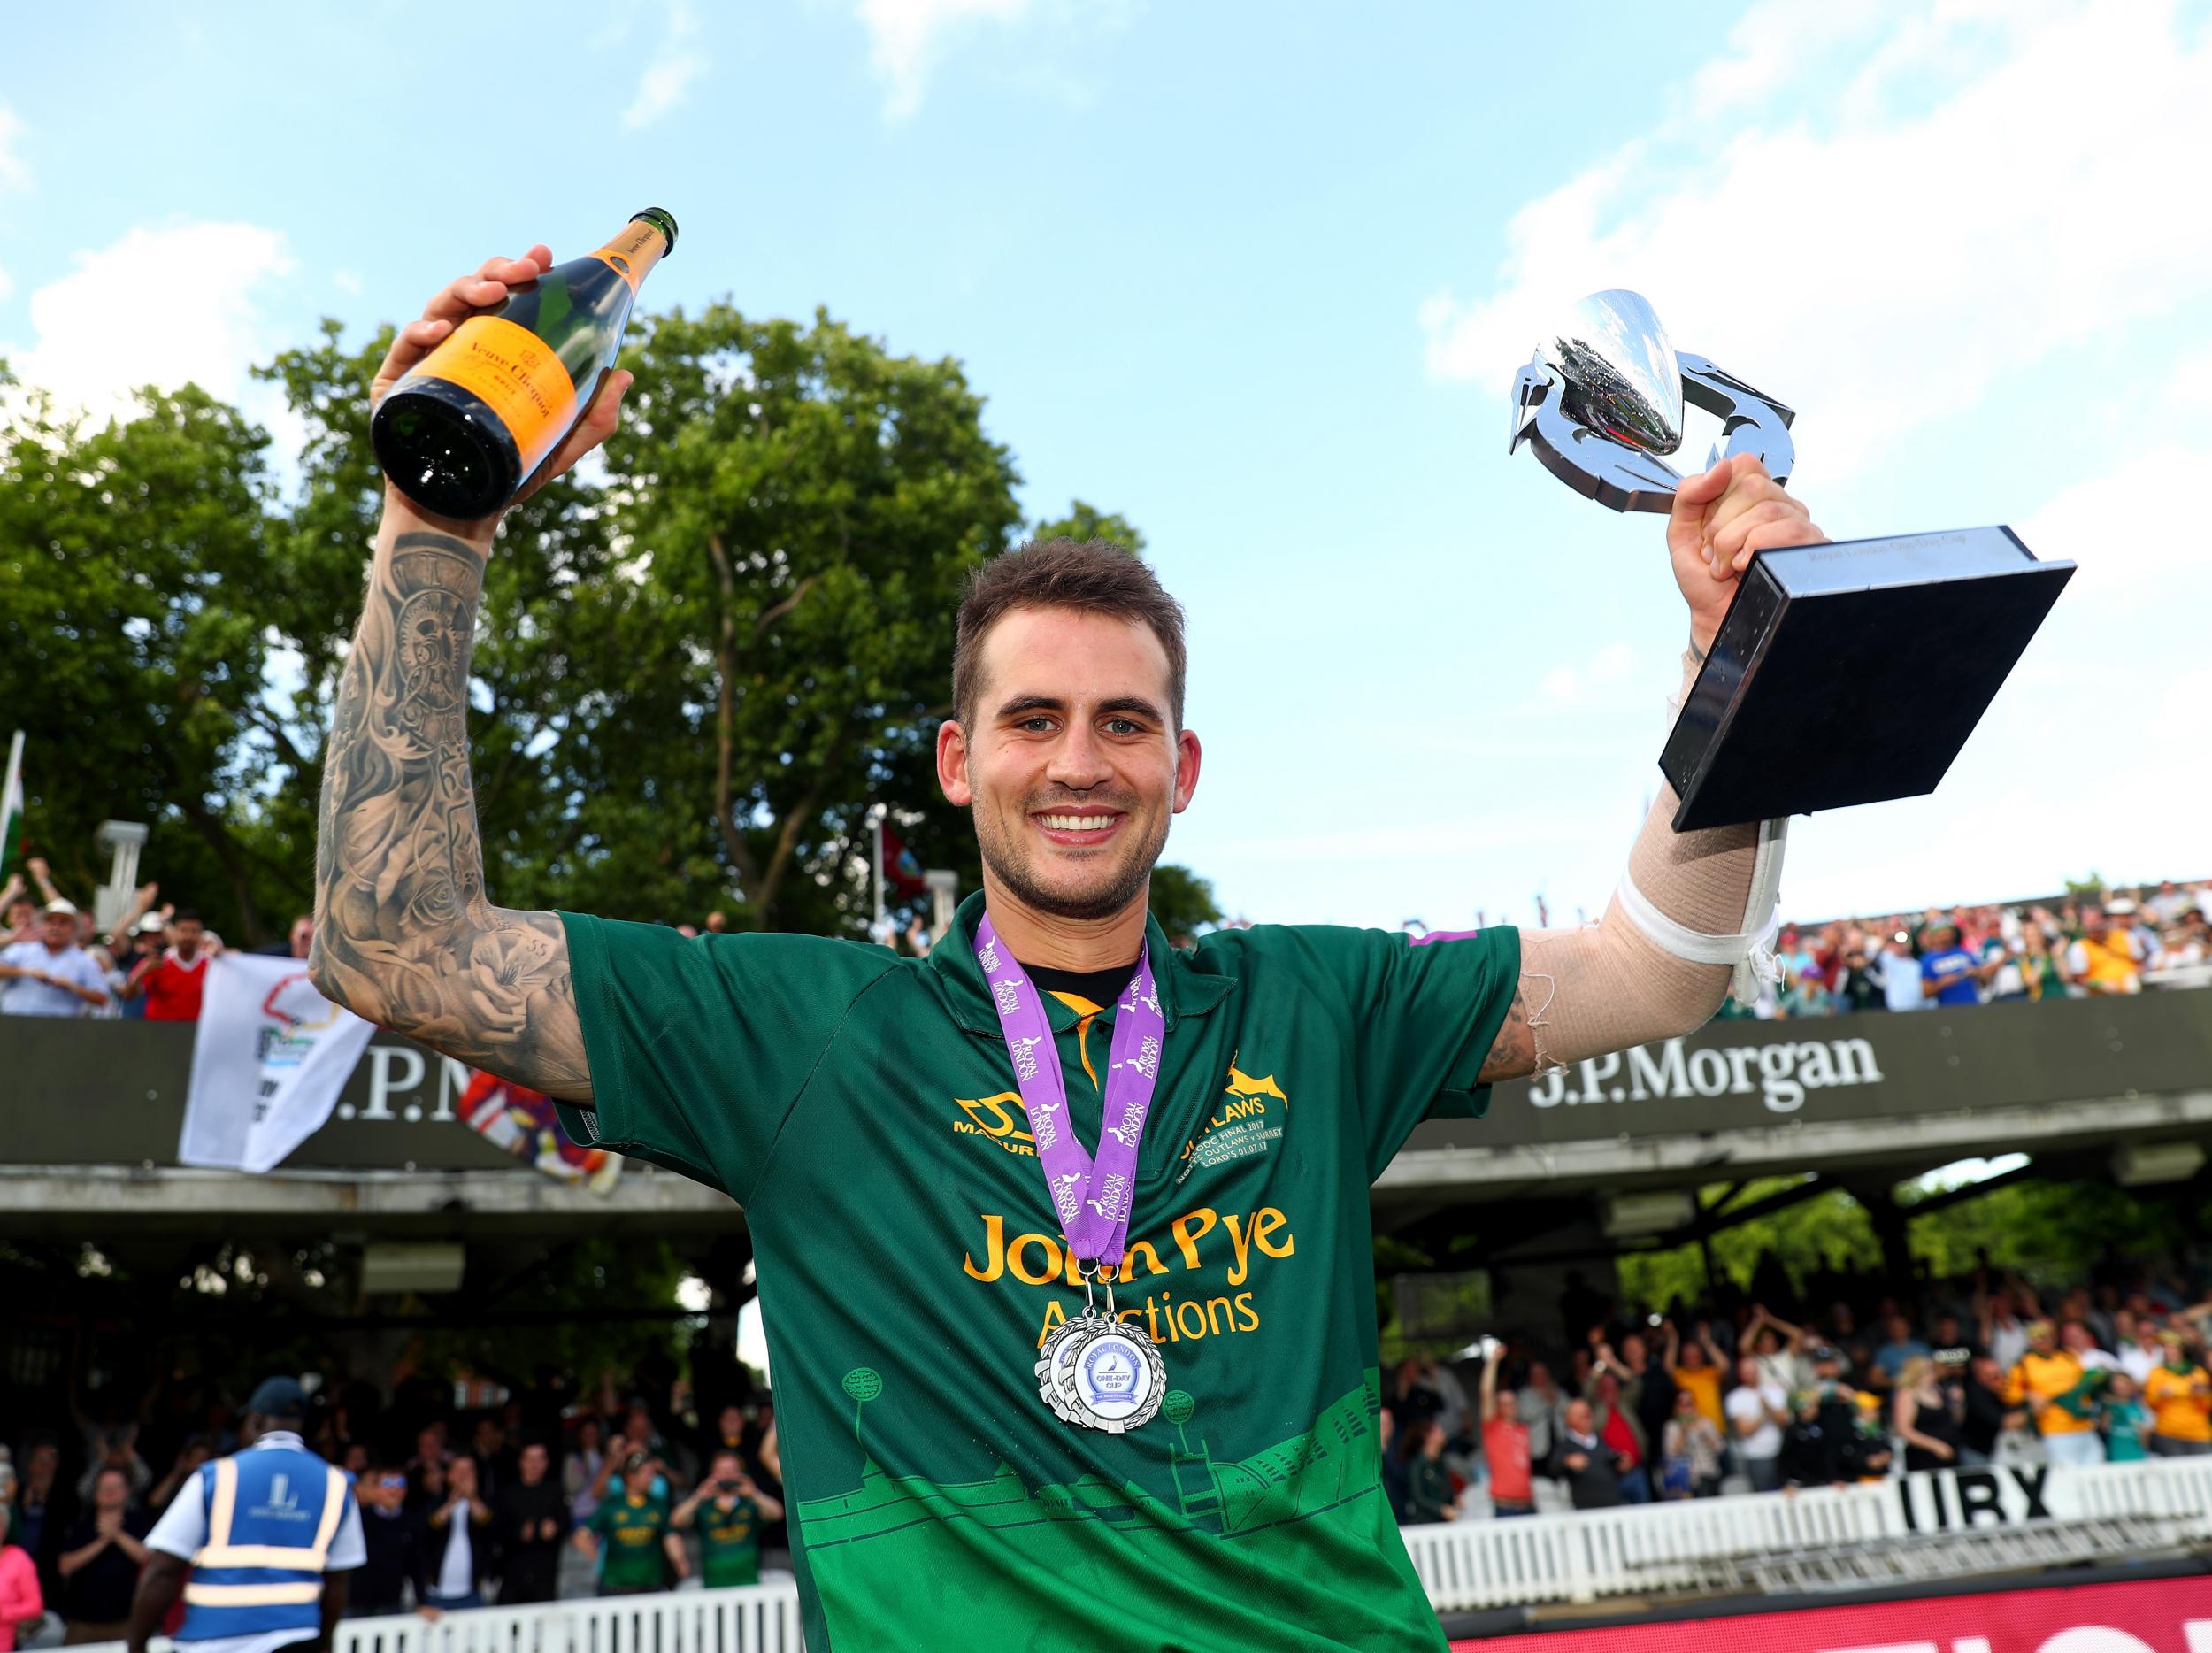 &#13;
Hales steered his county to glory with a historic knock &#13;